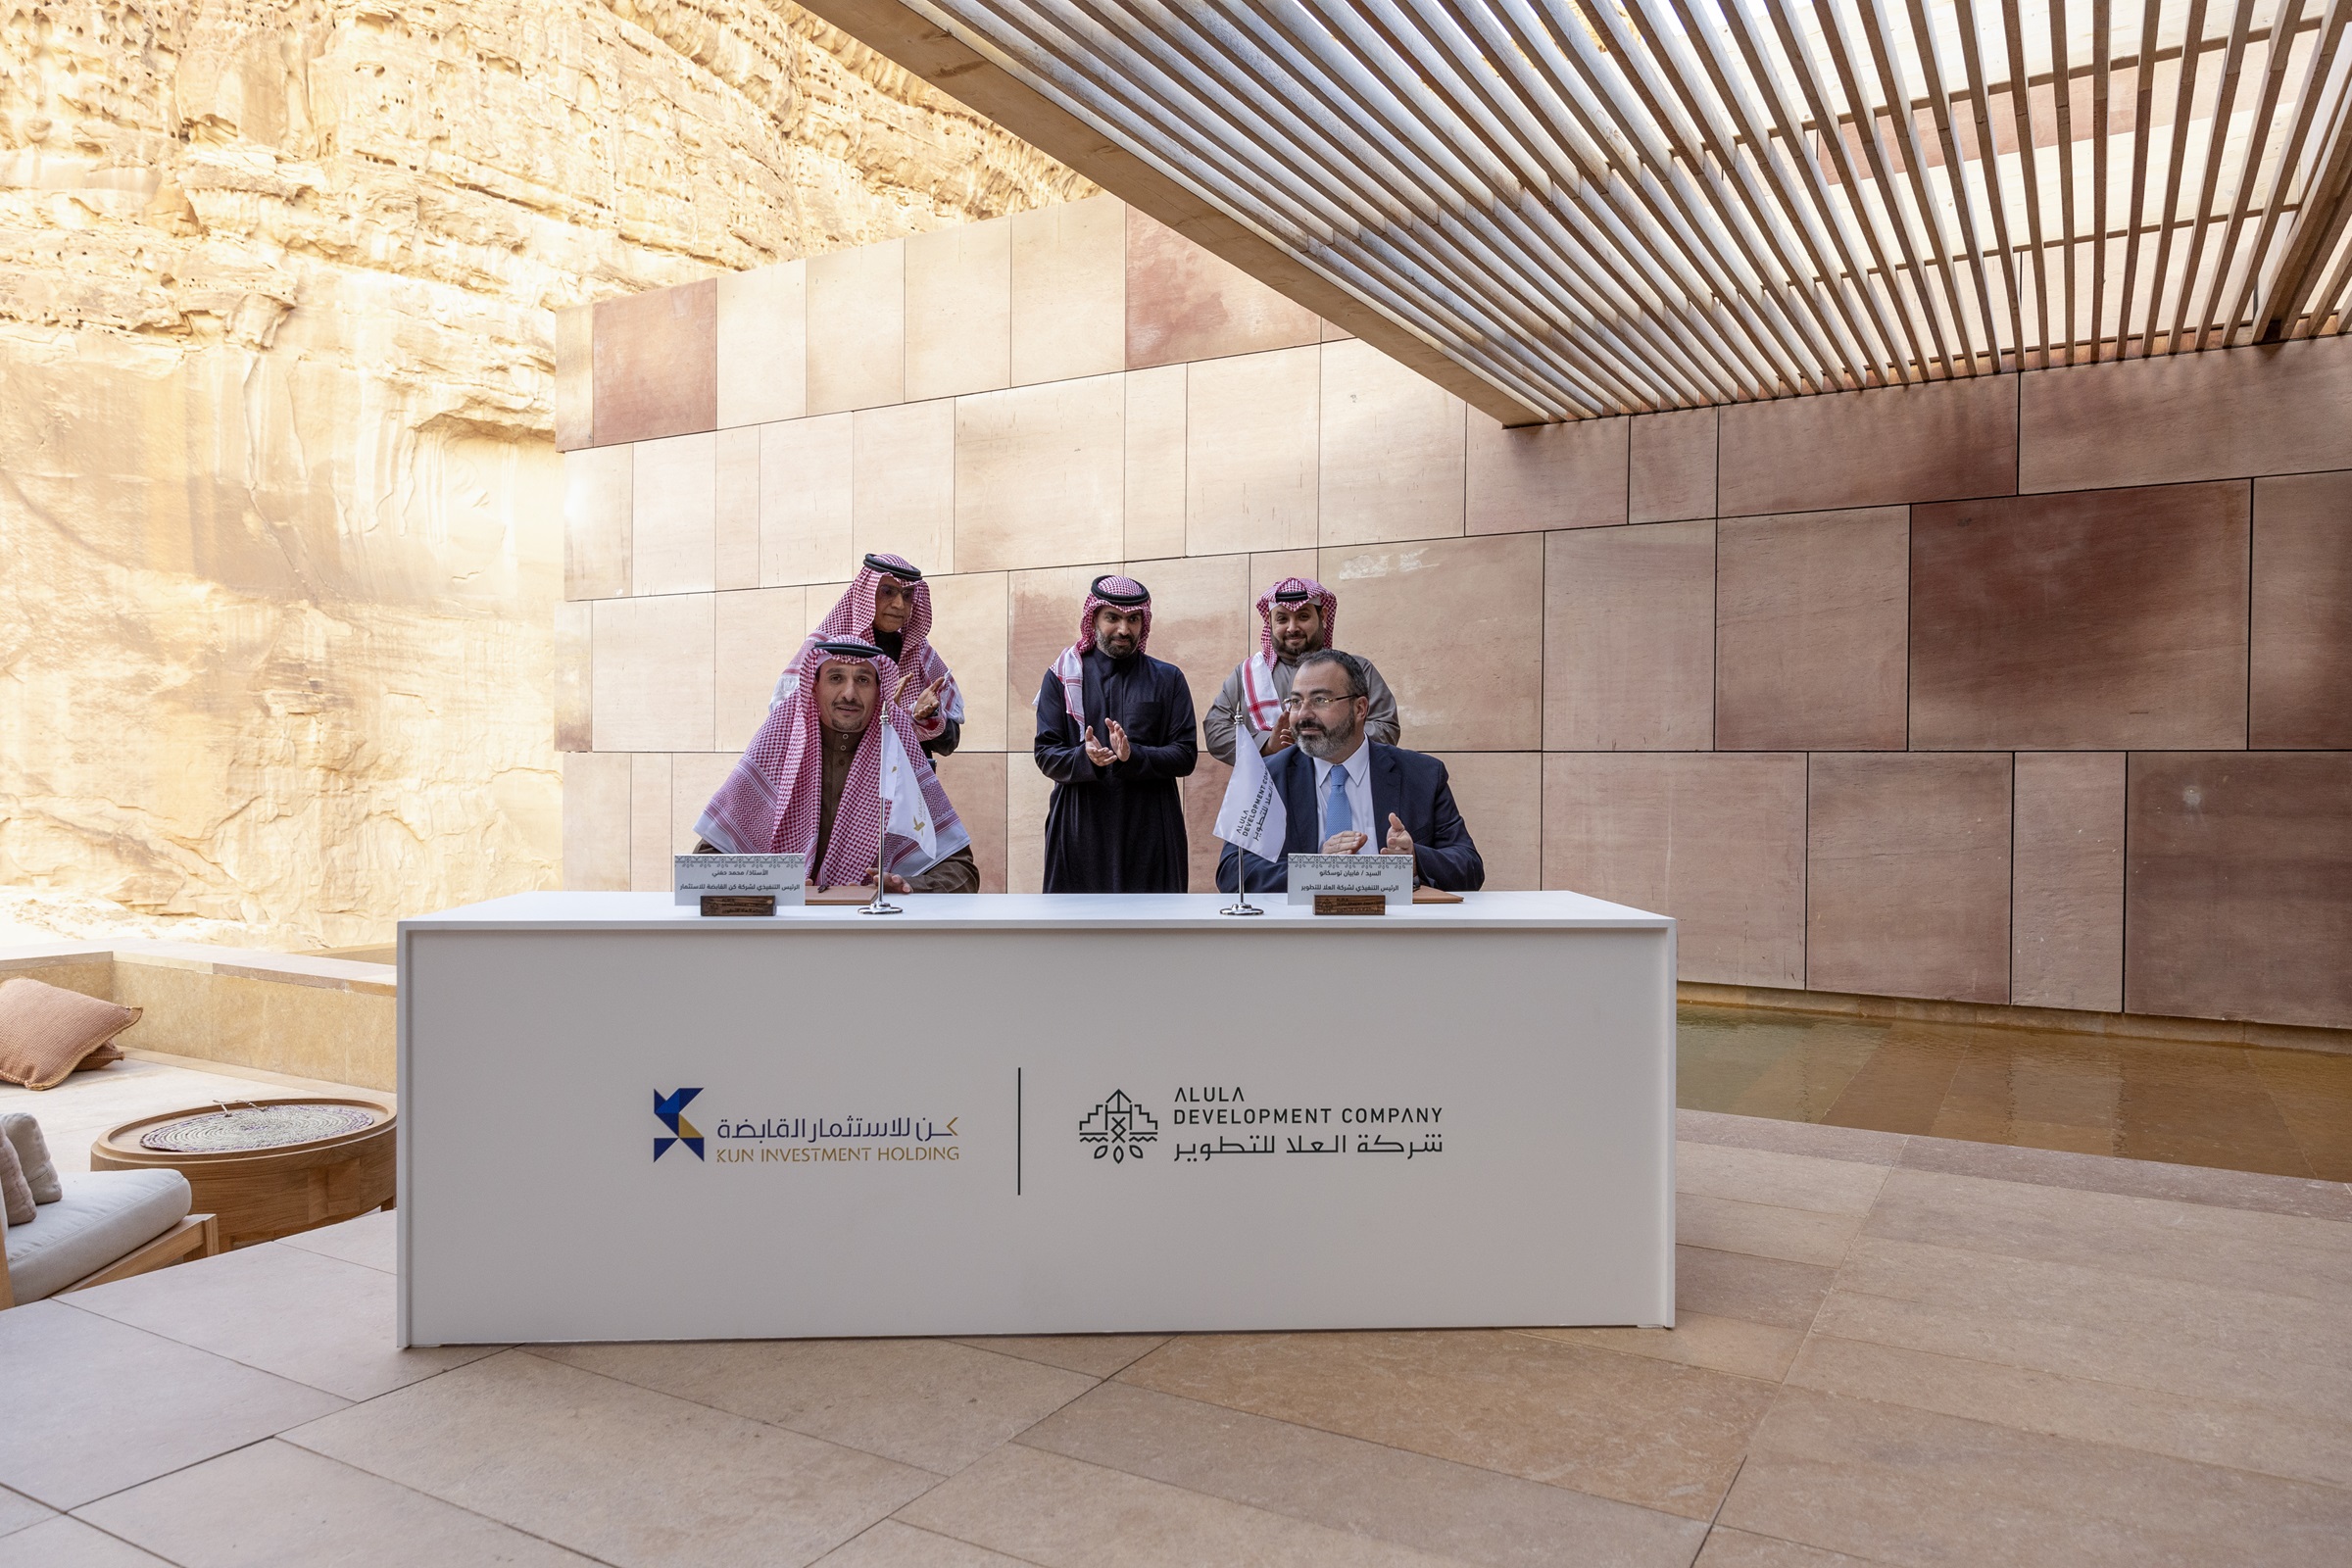 Governor of the Royal Commission for AlUla oversees the Signing Ceremony as KUN Investment Holding and AlUla Development Company Join Forces for the Aman Hegra Project Development